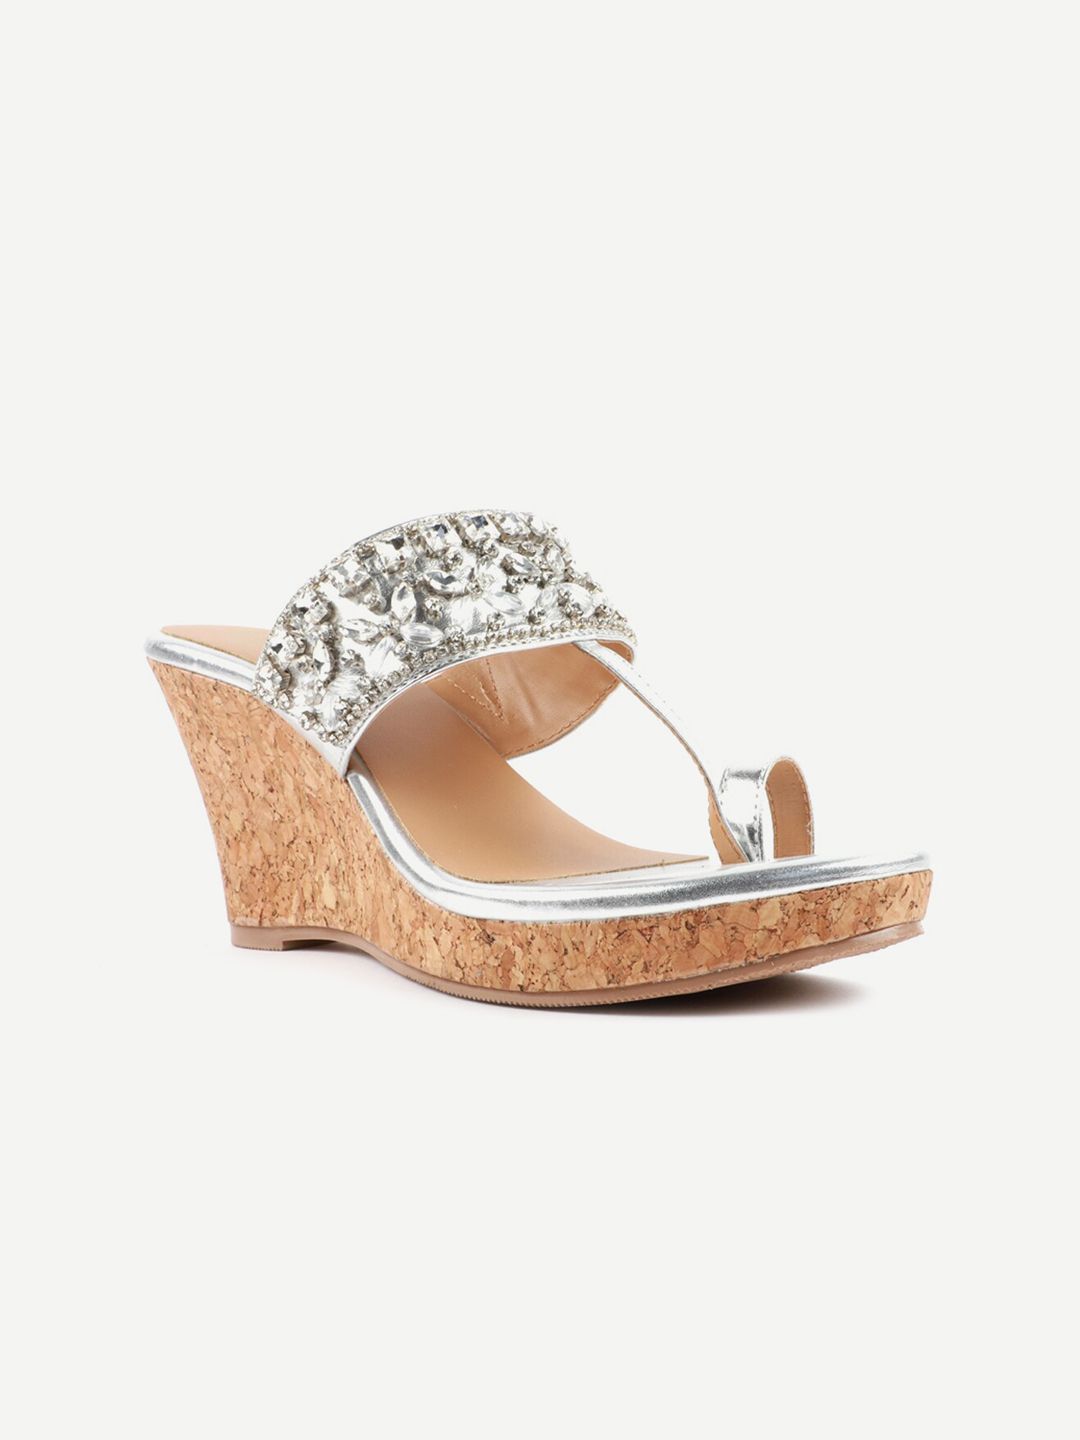 Carlton London Silver-Toned Wedge Sandals with Laser Cuts Price in India